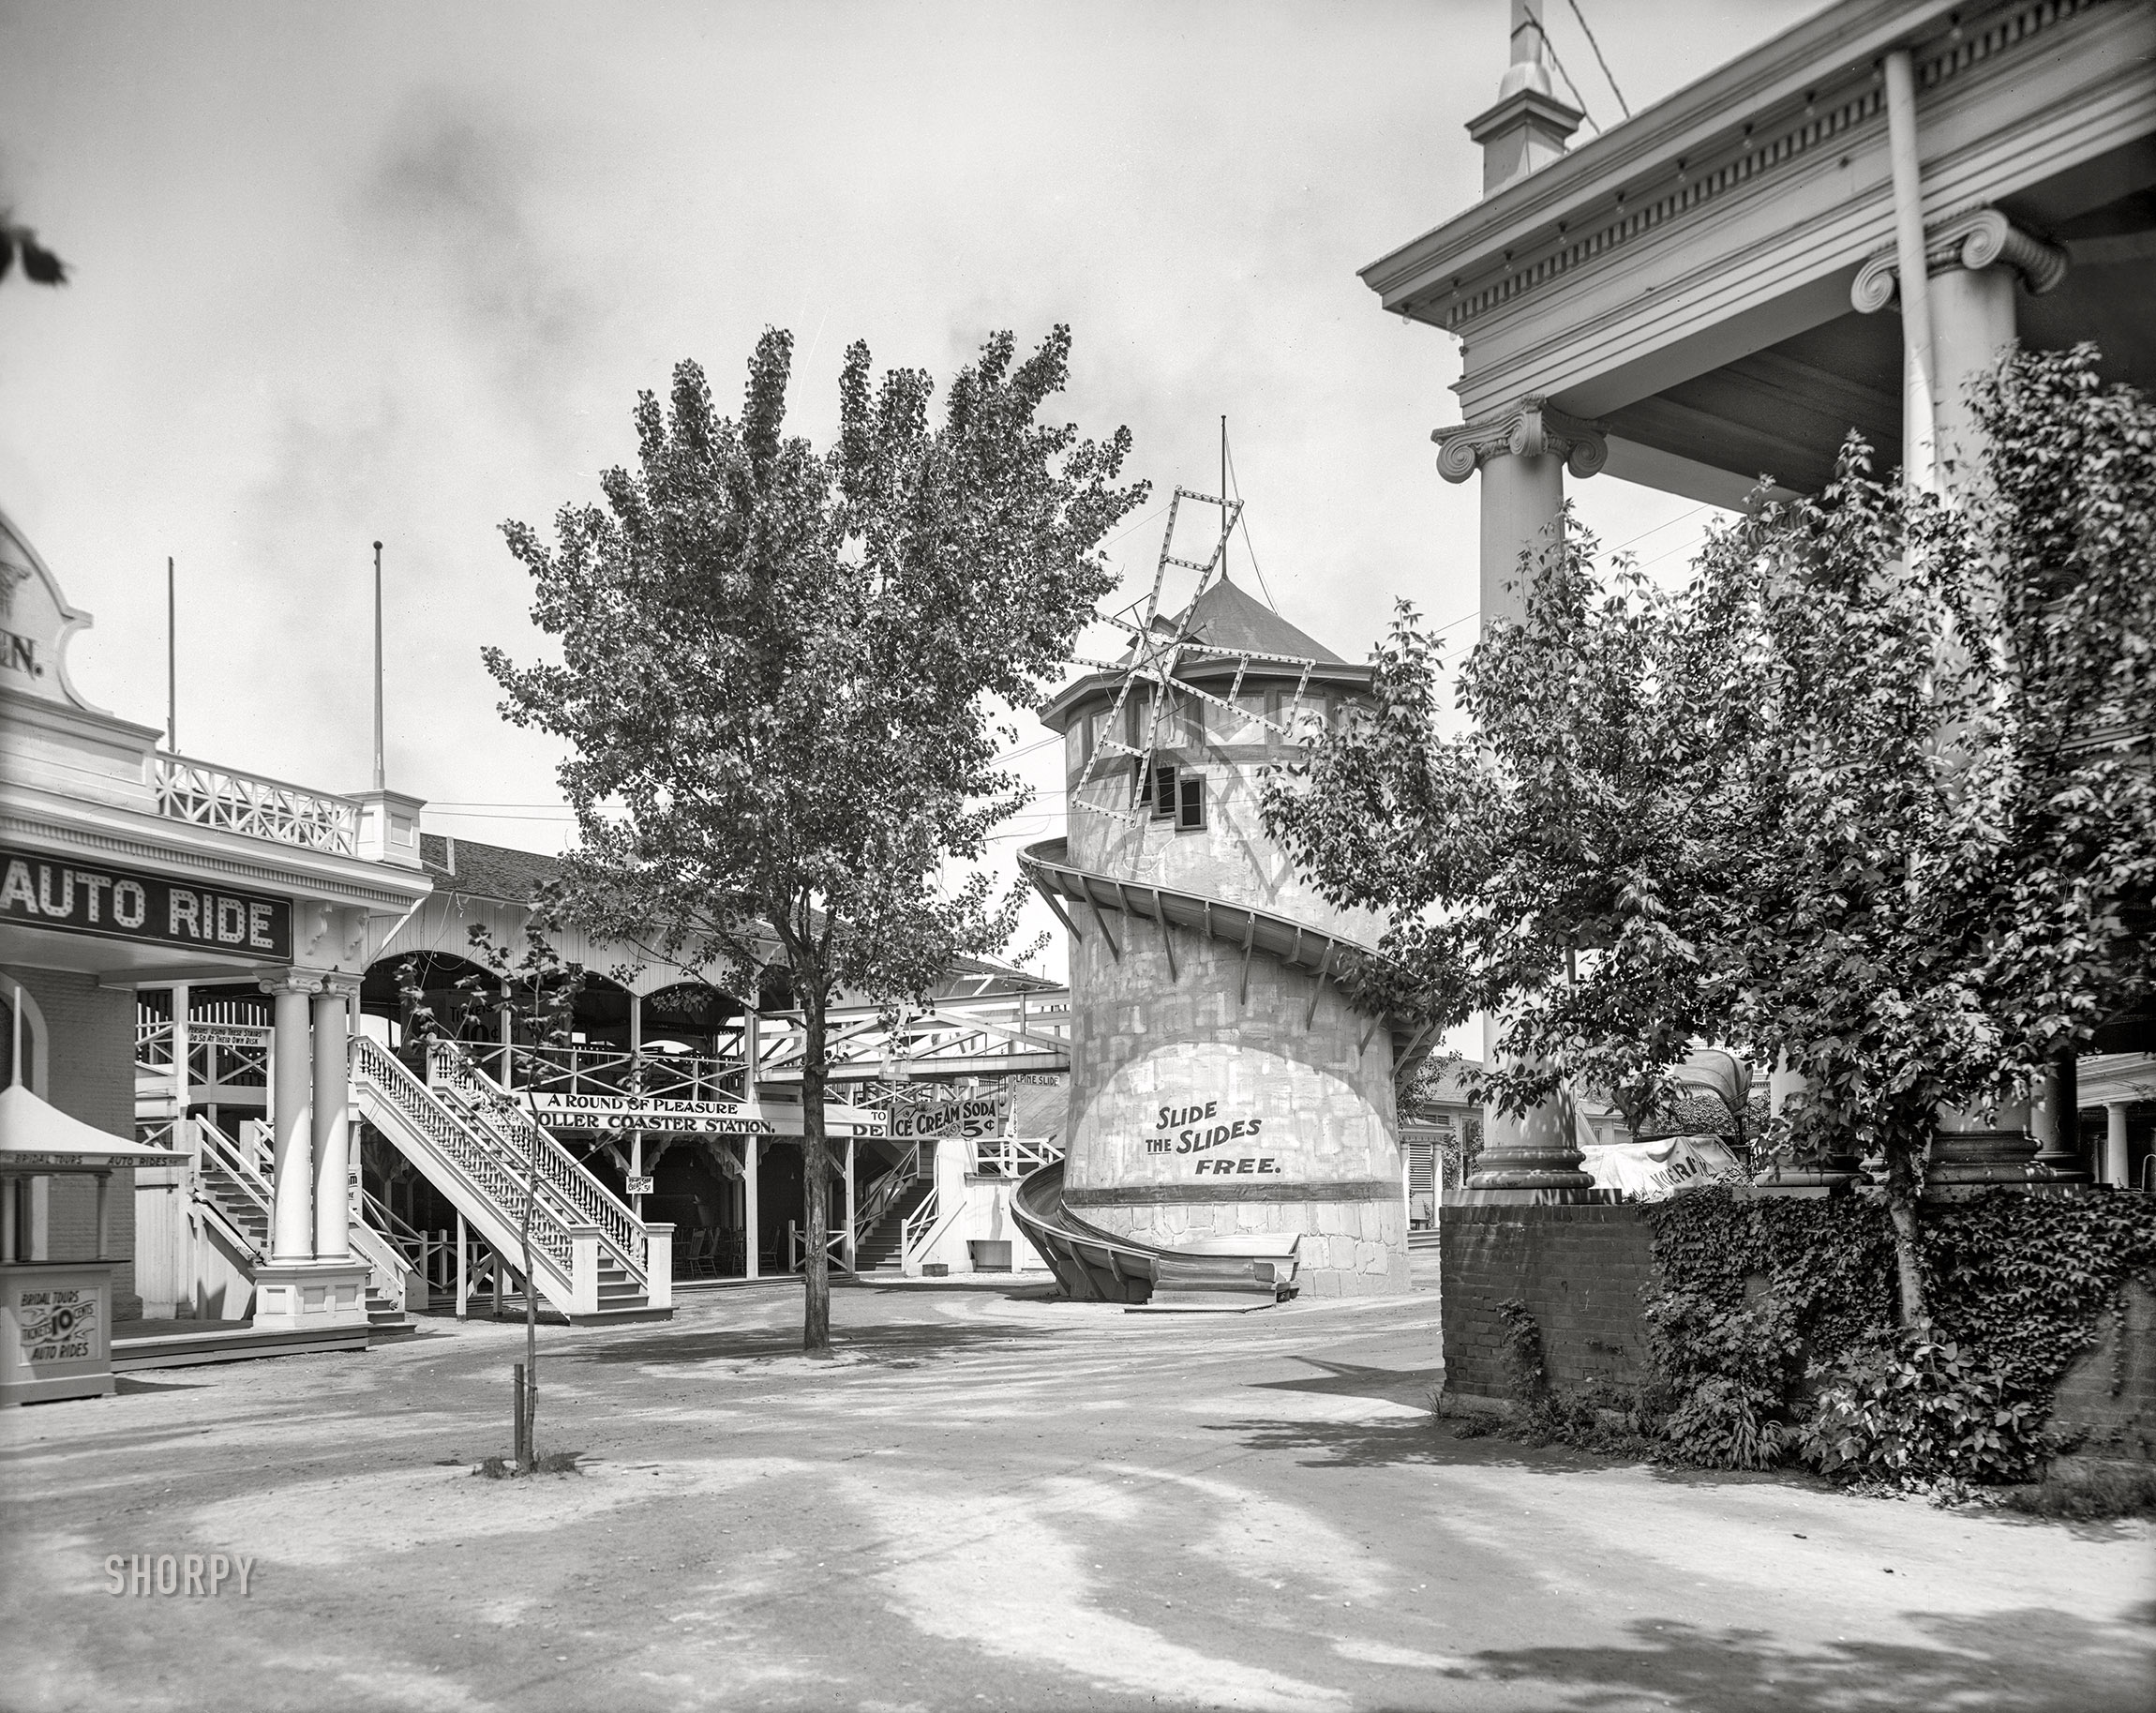 Cincinnati, Ohio, circa 1906. "View in Chester Park." Bridal Tours and Auto Rides, 10 cents. Slide the Slides for free! 8x10 inch glass negative, Detroit Publishing Company. View full size.